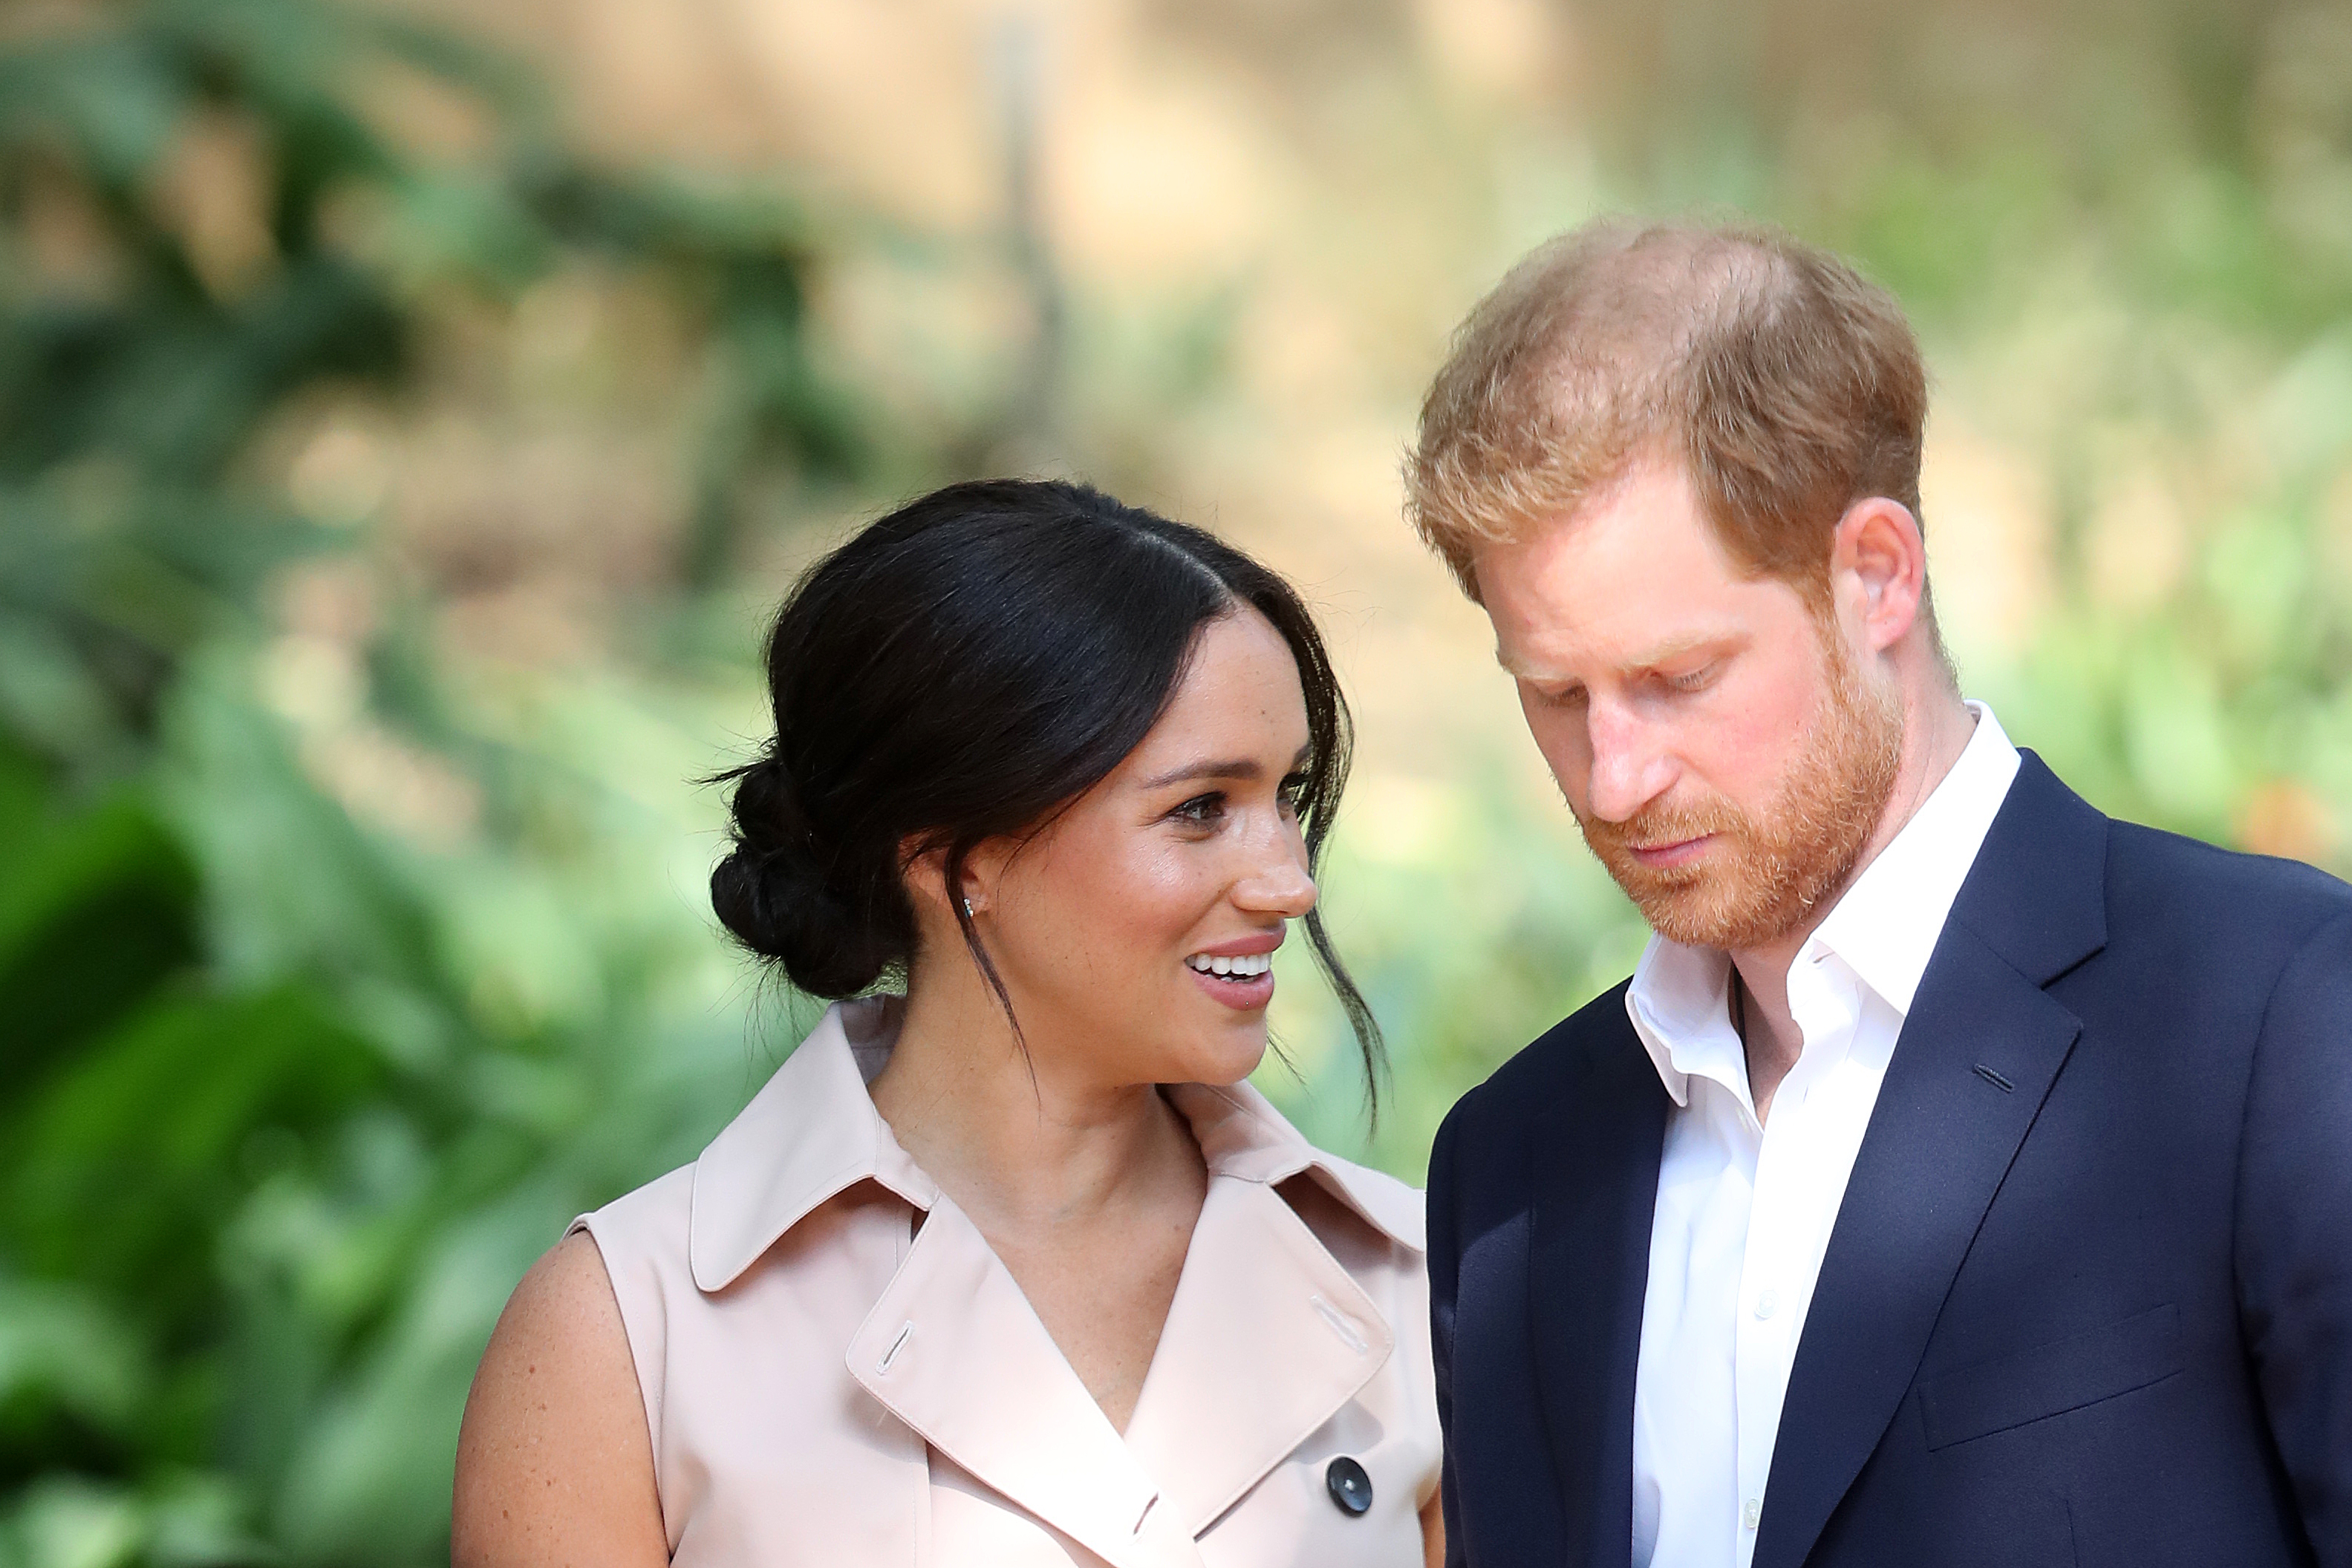 Prince Harry and Meghan Markle attend a Creative Industries and Business Reception on October 2, 2019, in Johannesburg, South Africa. | Source: Getty Images